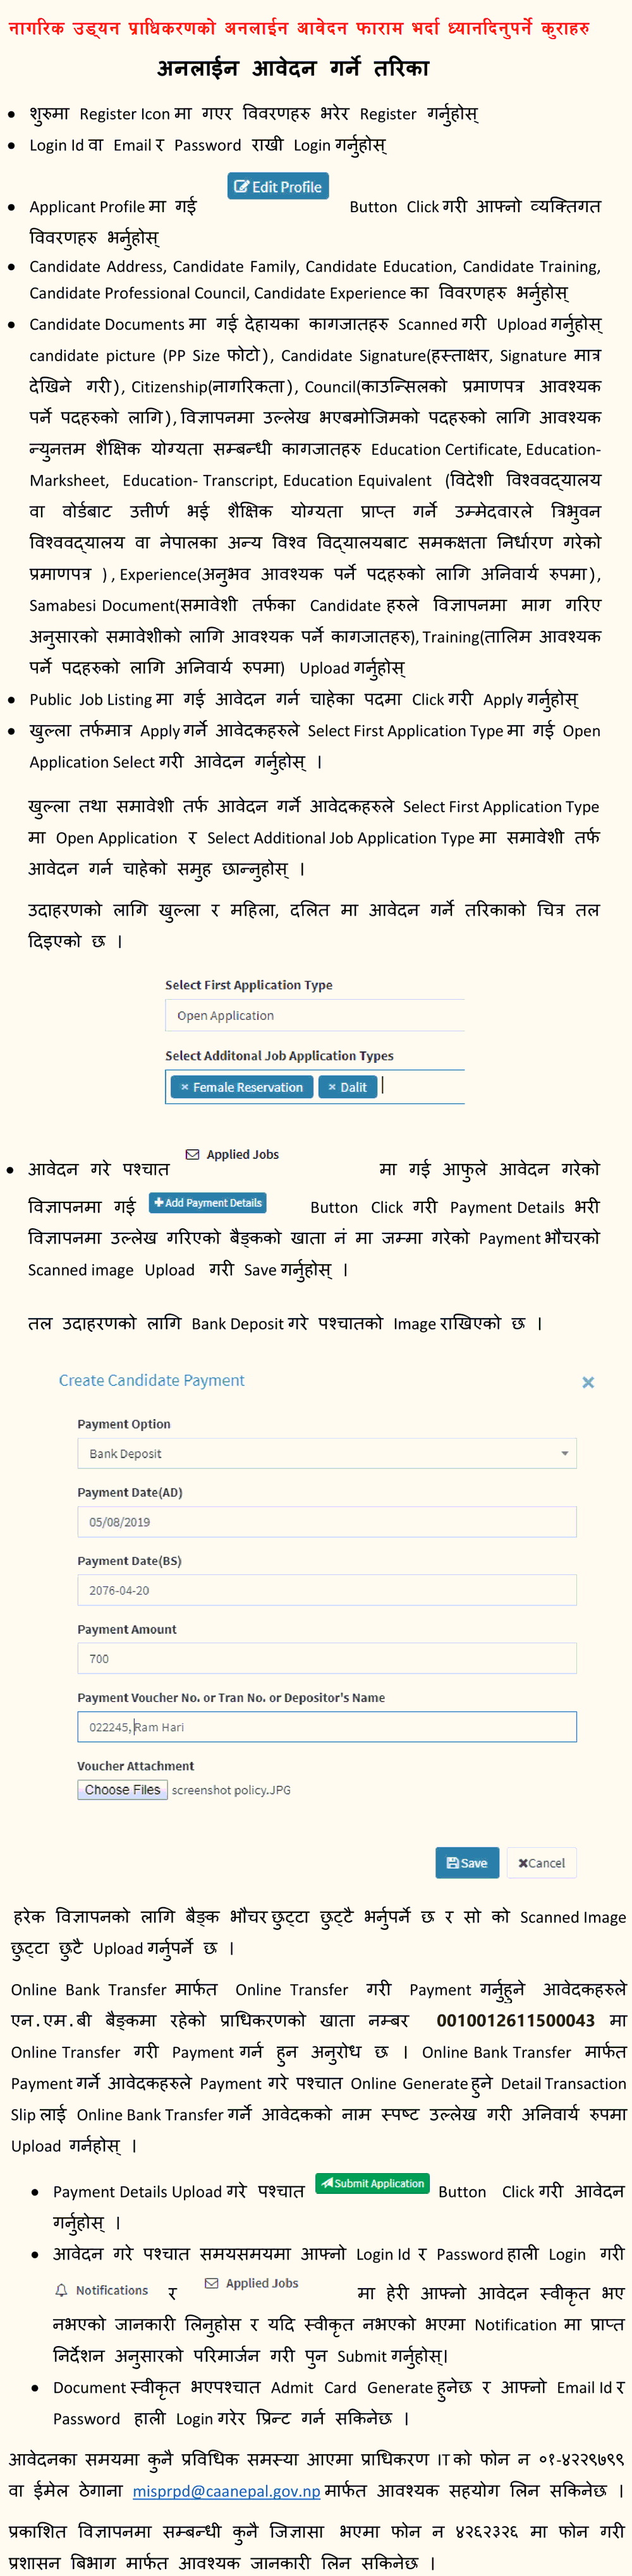 Civil Aviation Authority of Nepal Online Application Submission User Guide